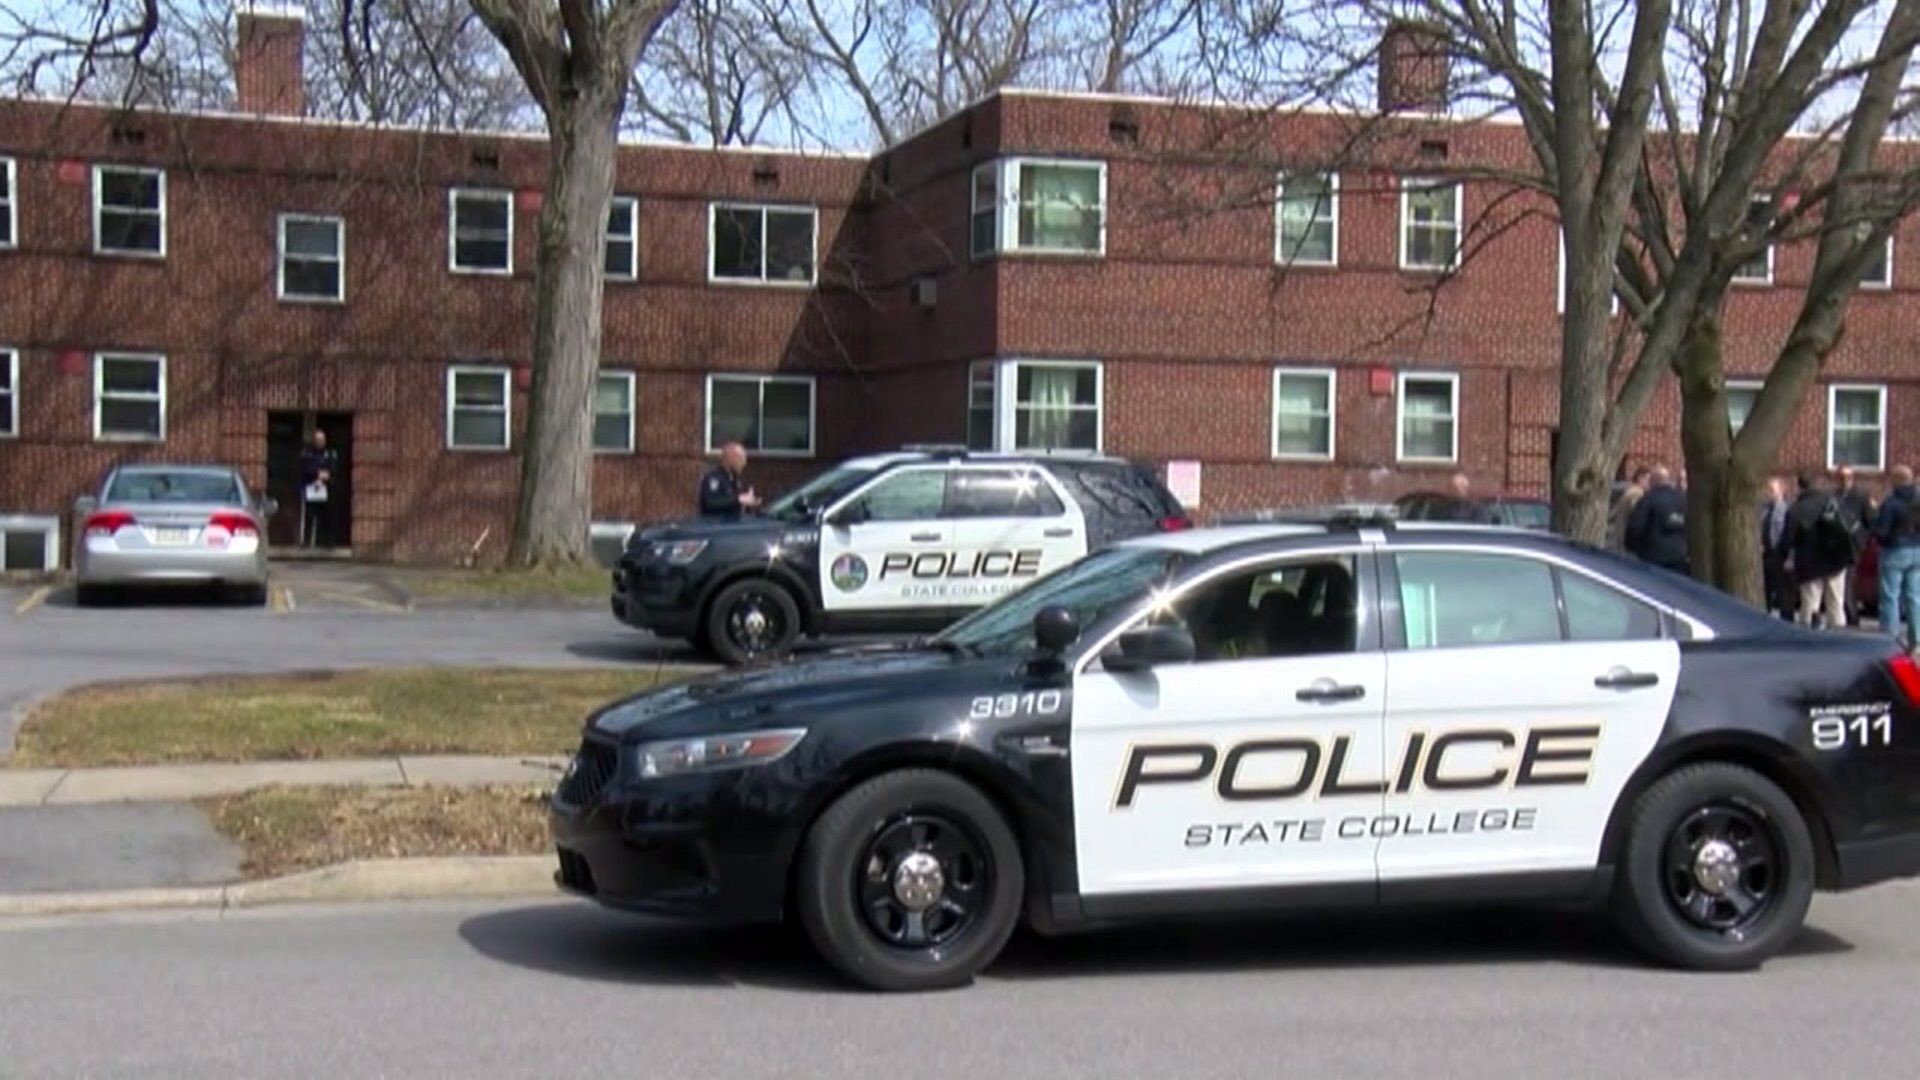 Man Dead After Shooting Involving Police in State College